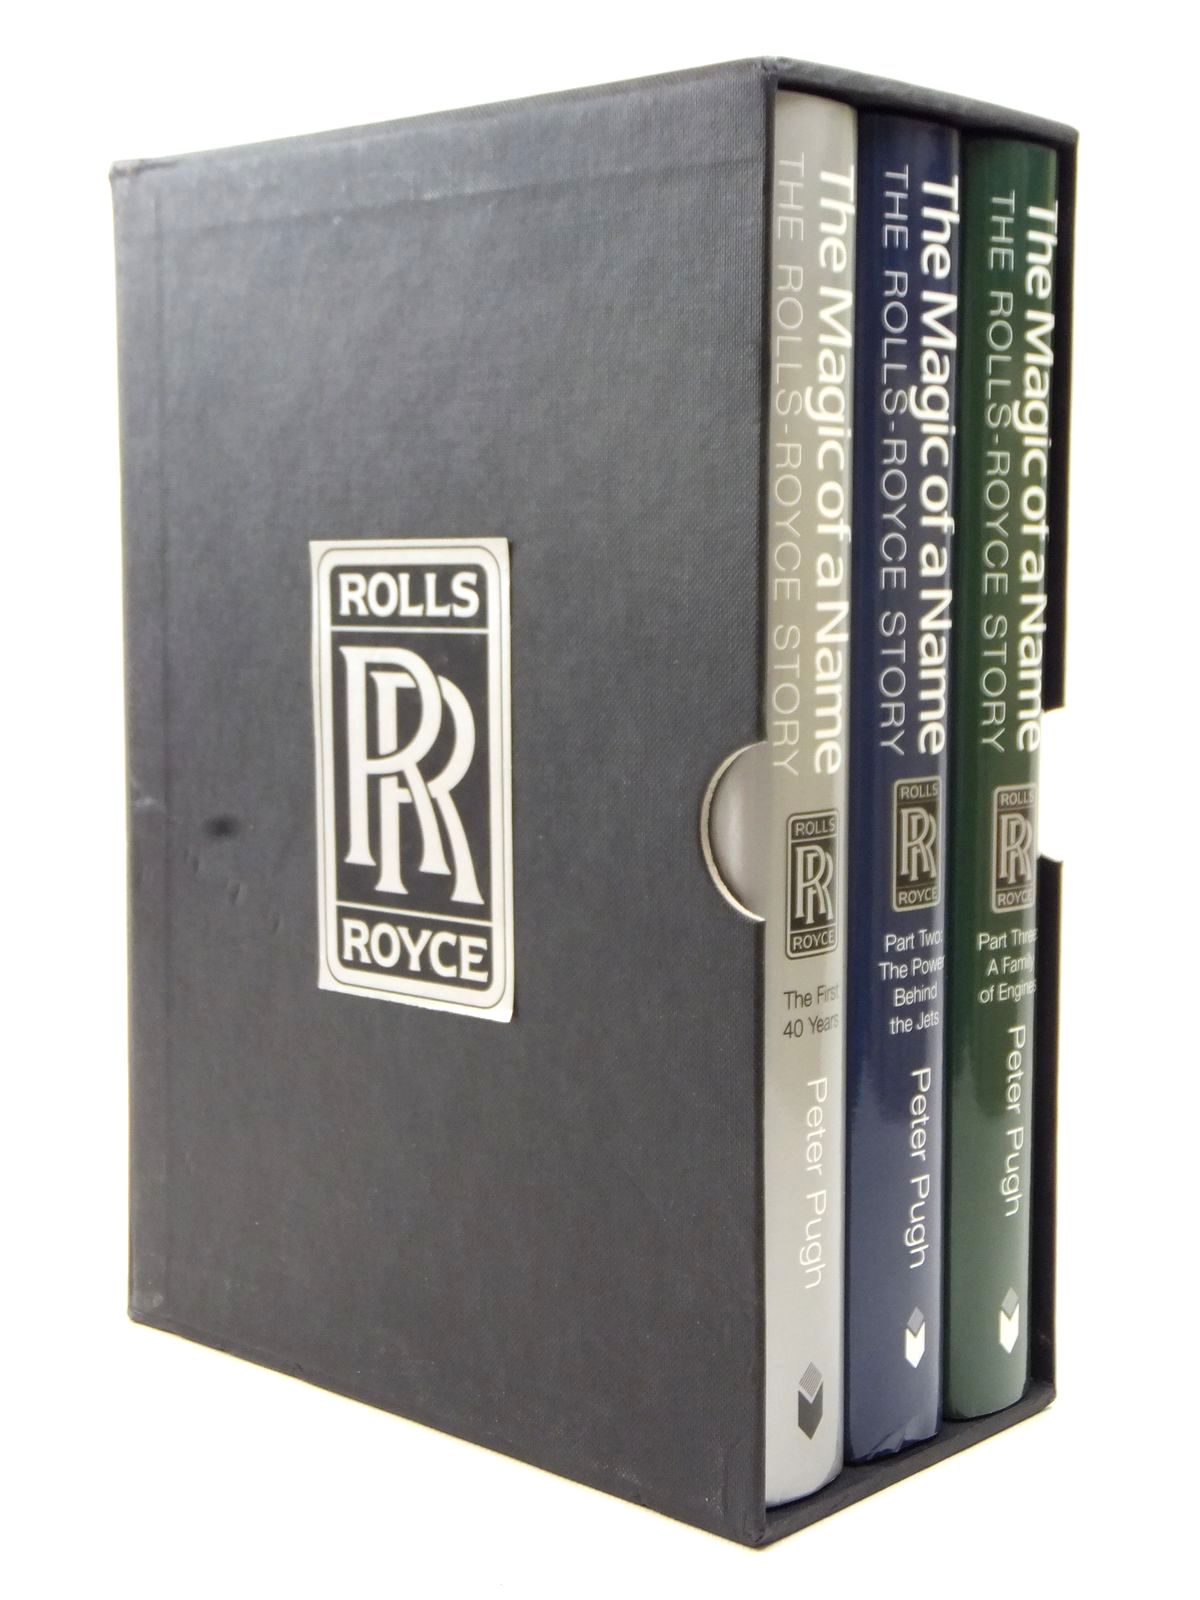 The Magic Of A Name: The Rolls-royce Story 3 Volumes